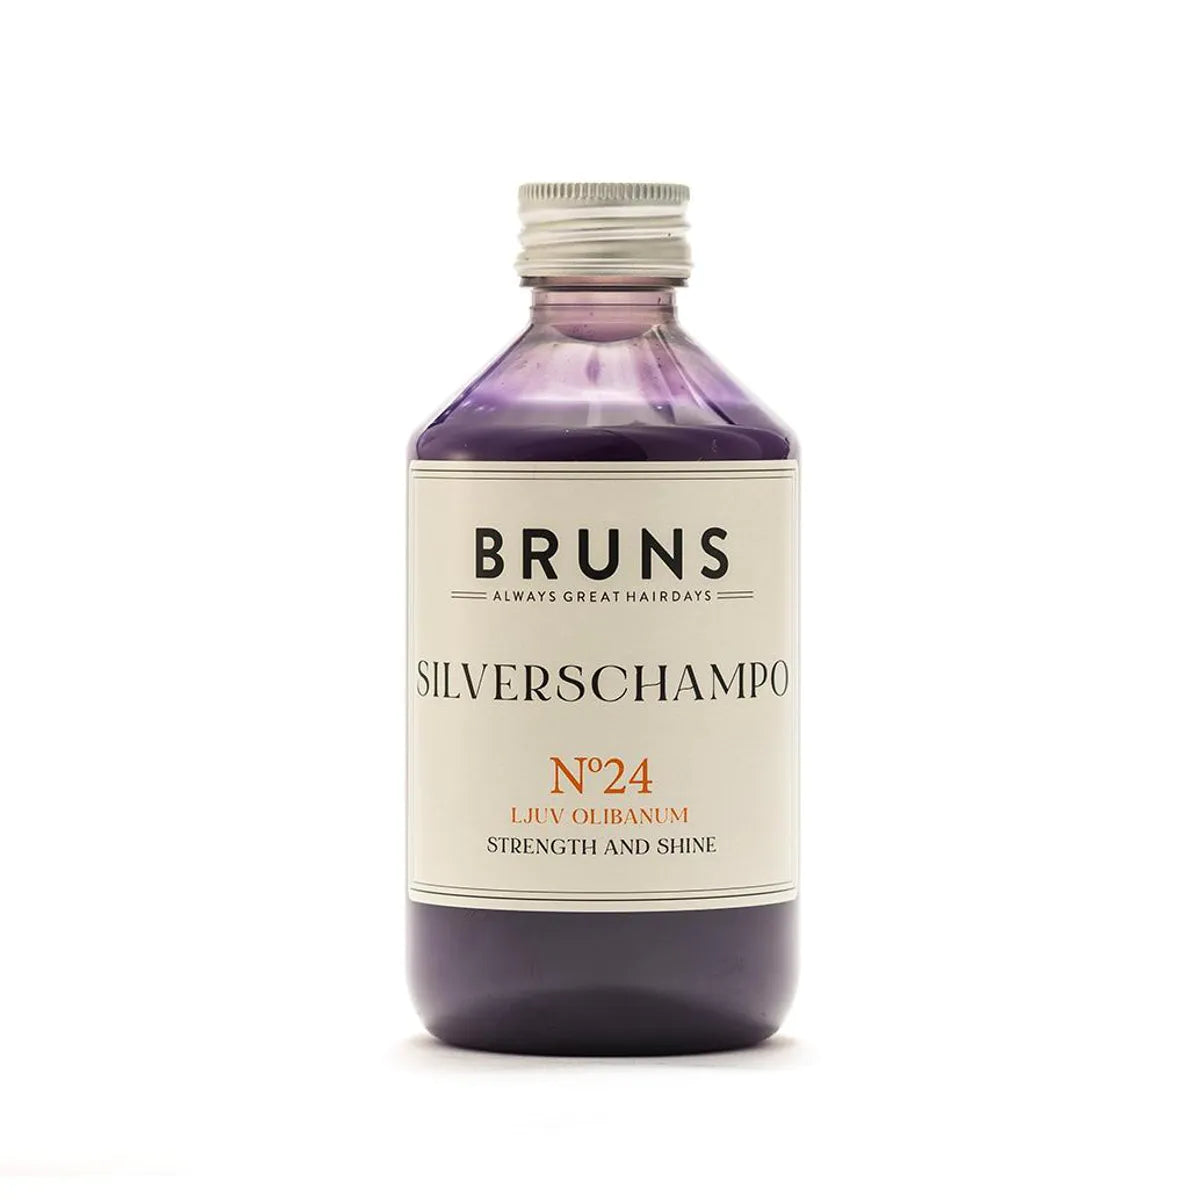 BRUNS products